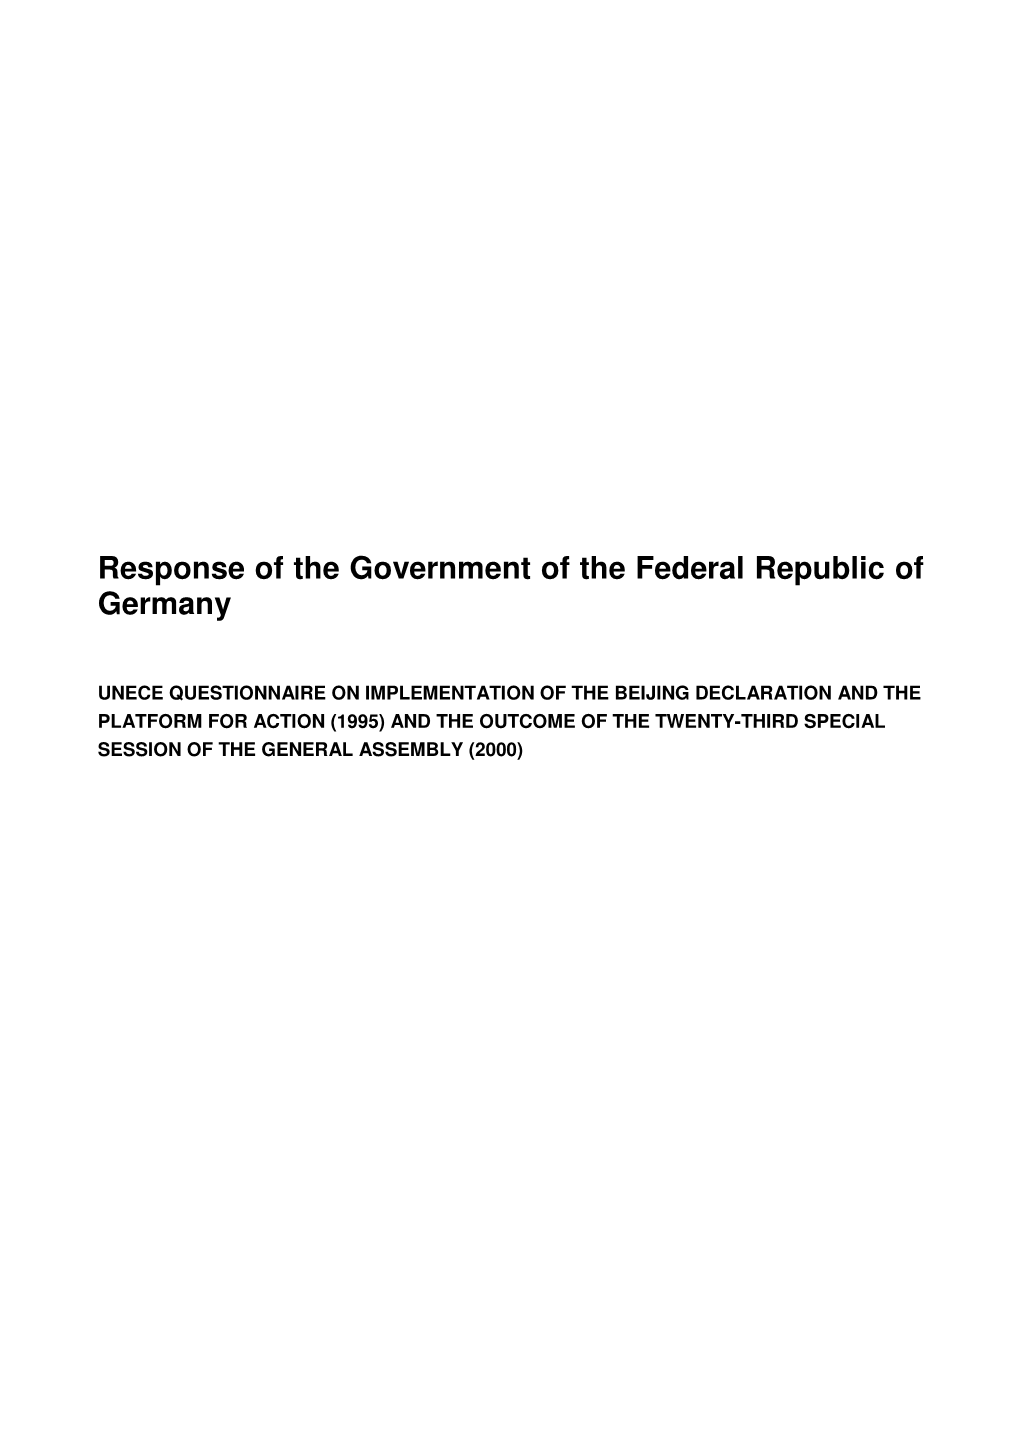 Response of the Government of the Federal Republic of Germany